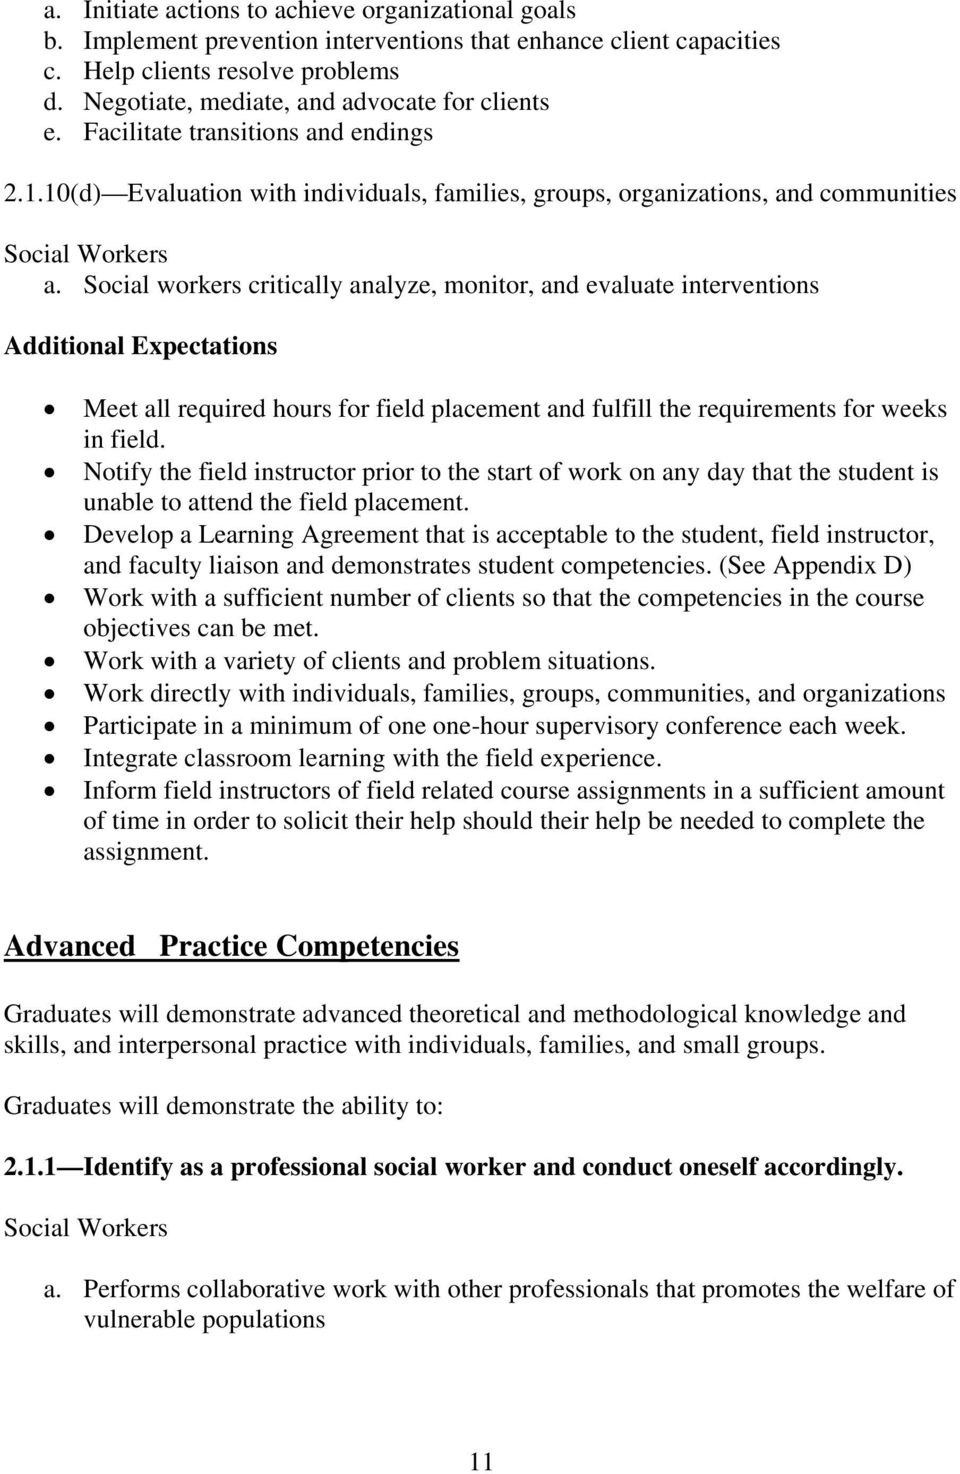 Social workers critically analyze, monitor, and evaluate interventions Additional Expectations Meet all required hours for field placement and fulfill the requirements for weeks in field.